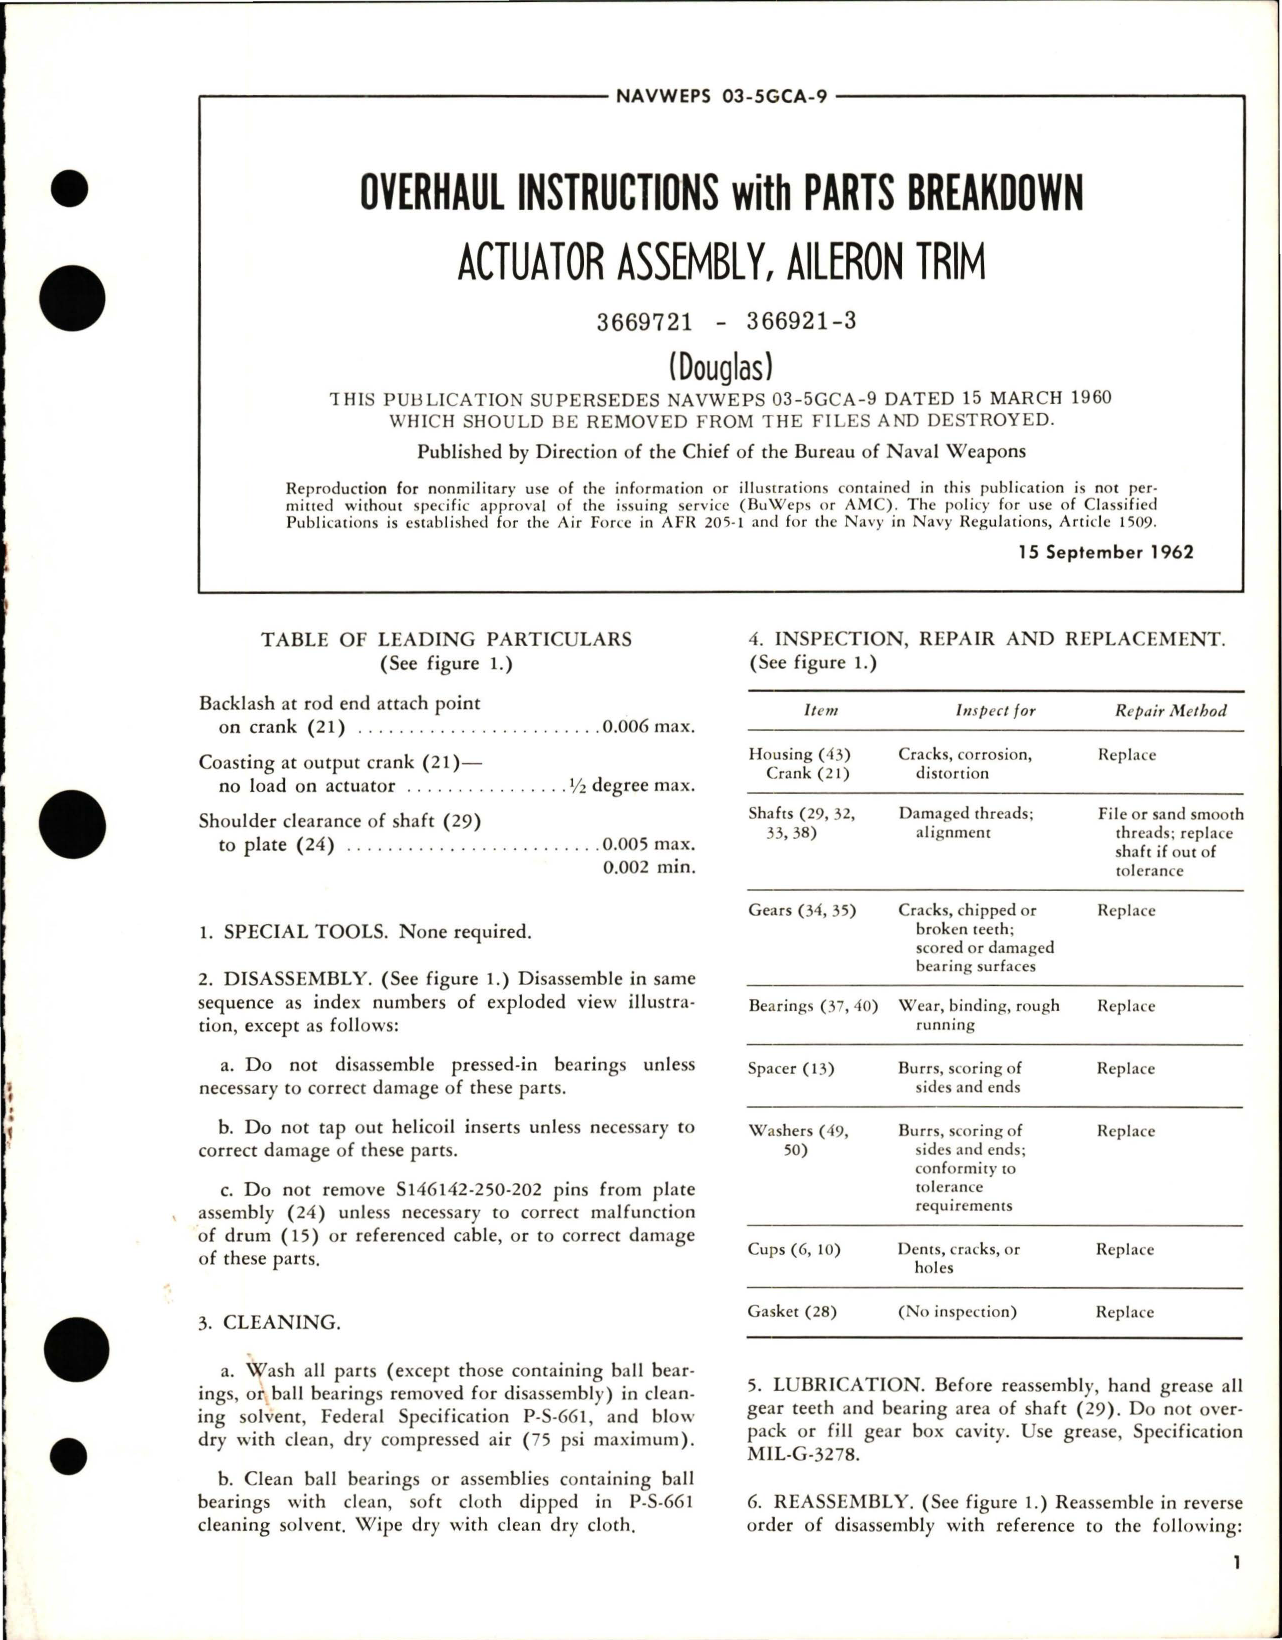 Sample page 1 from AirCorps Library document: Overhaul Instructions with Parts Breakdown for Aileron Trim Actuator Assembly - 3669721 and 366921-3